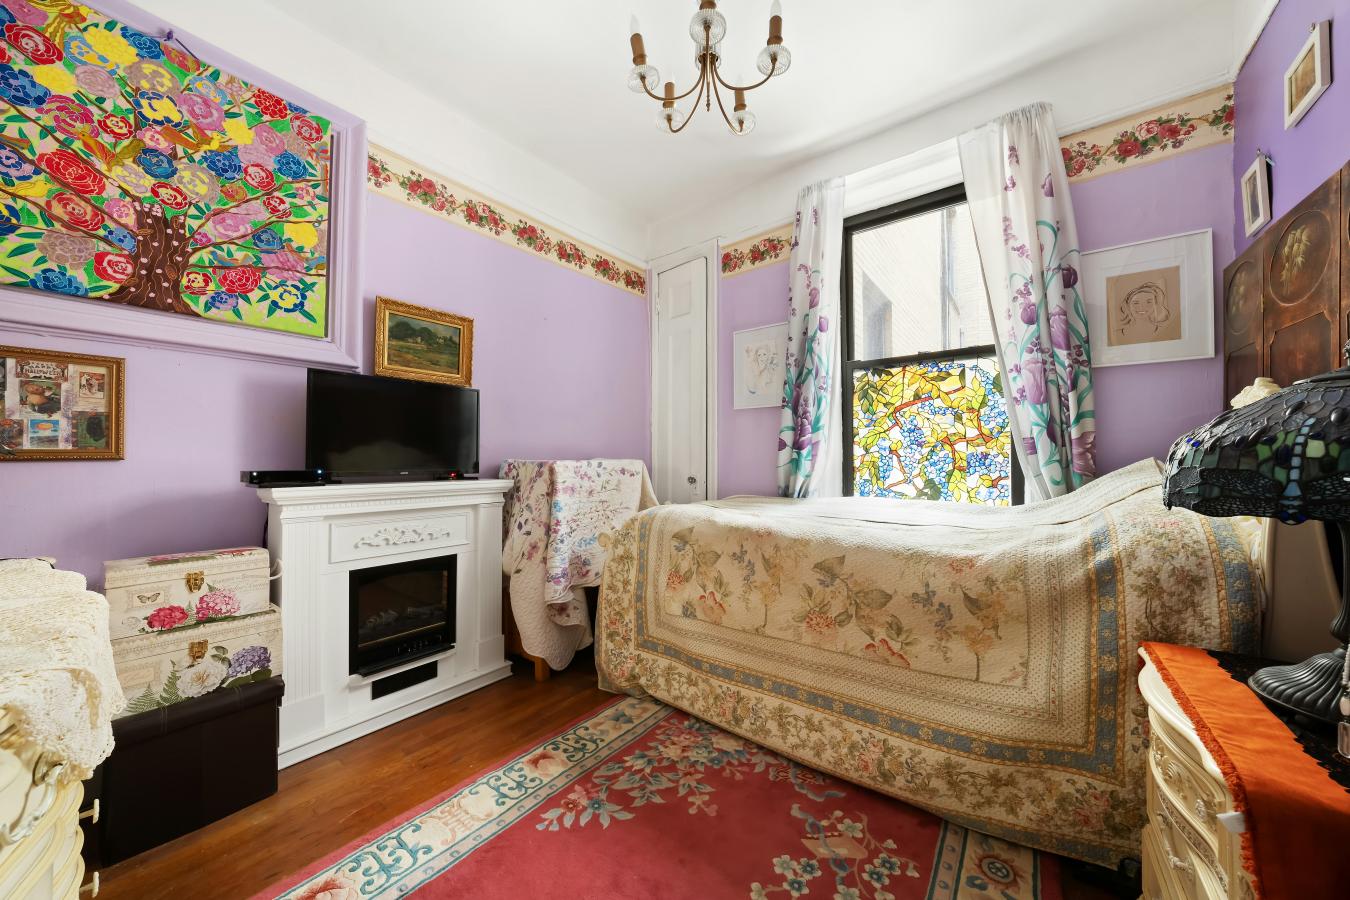 528 West 111th Street, Morningside Heights, New York, 10025, United States, 3 Bedrooms Bedrooms, ,1 BathroomBathrooms,Residential,For Sale,528 West 111th Street,1499385